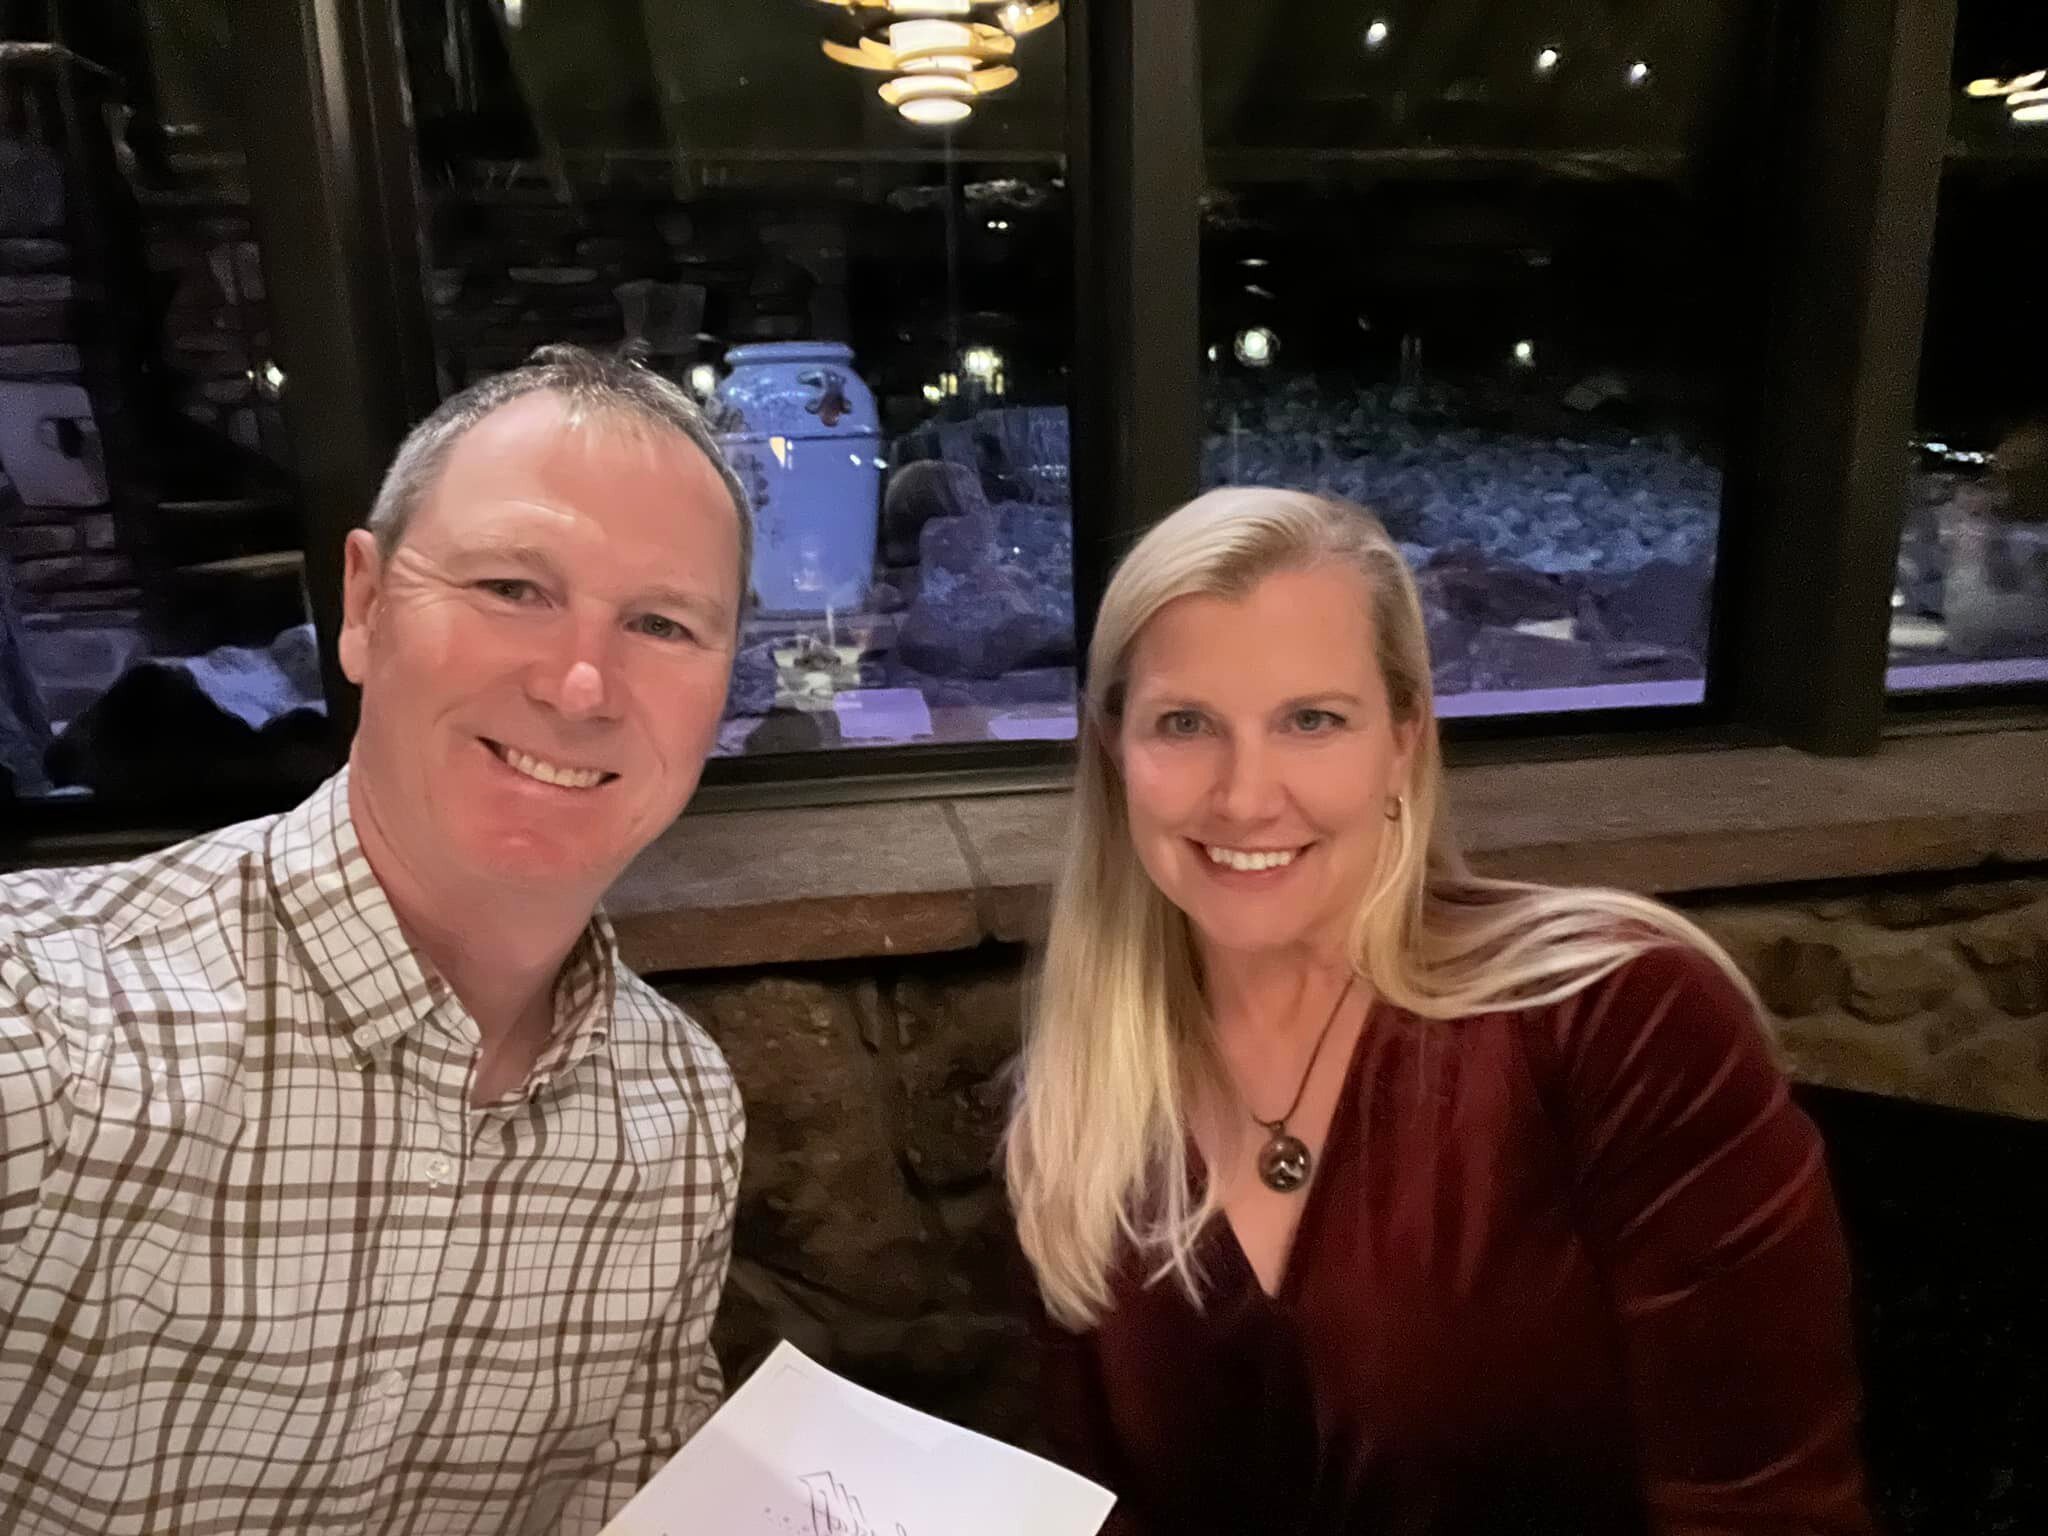 The Flagstaff House Restaurant here in Boulder is amazing ! They even had our name and anniversary printed on our menus. Wonderful experience.